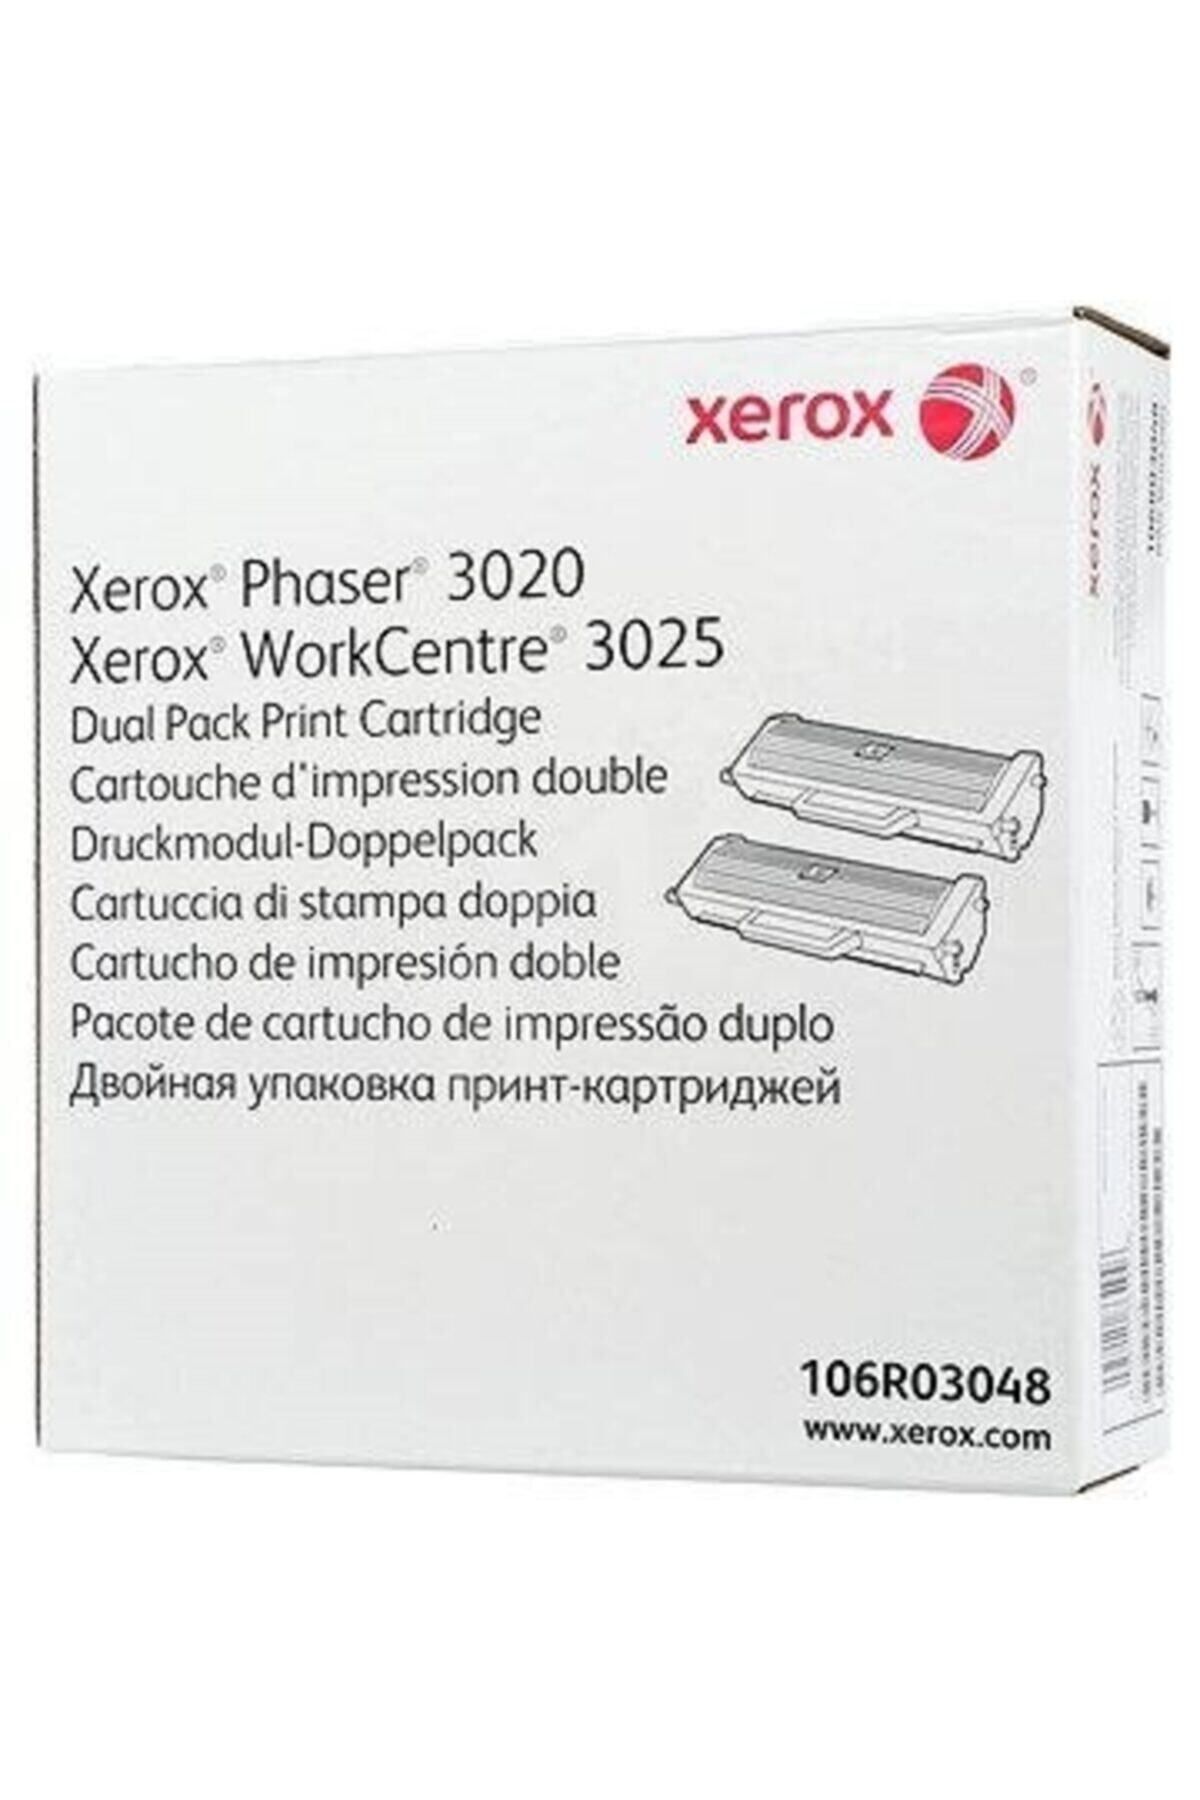 Xerox 106r03048 Phaser 3020 / Wc3025 Dual Pack Toner 3000 Paper